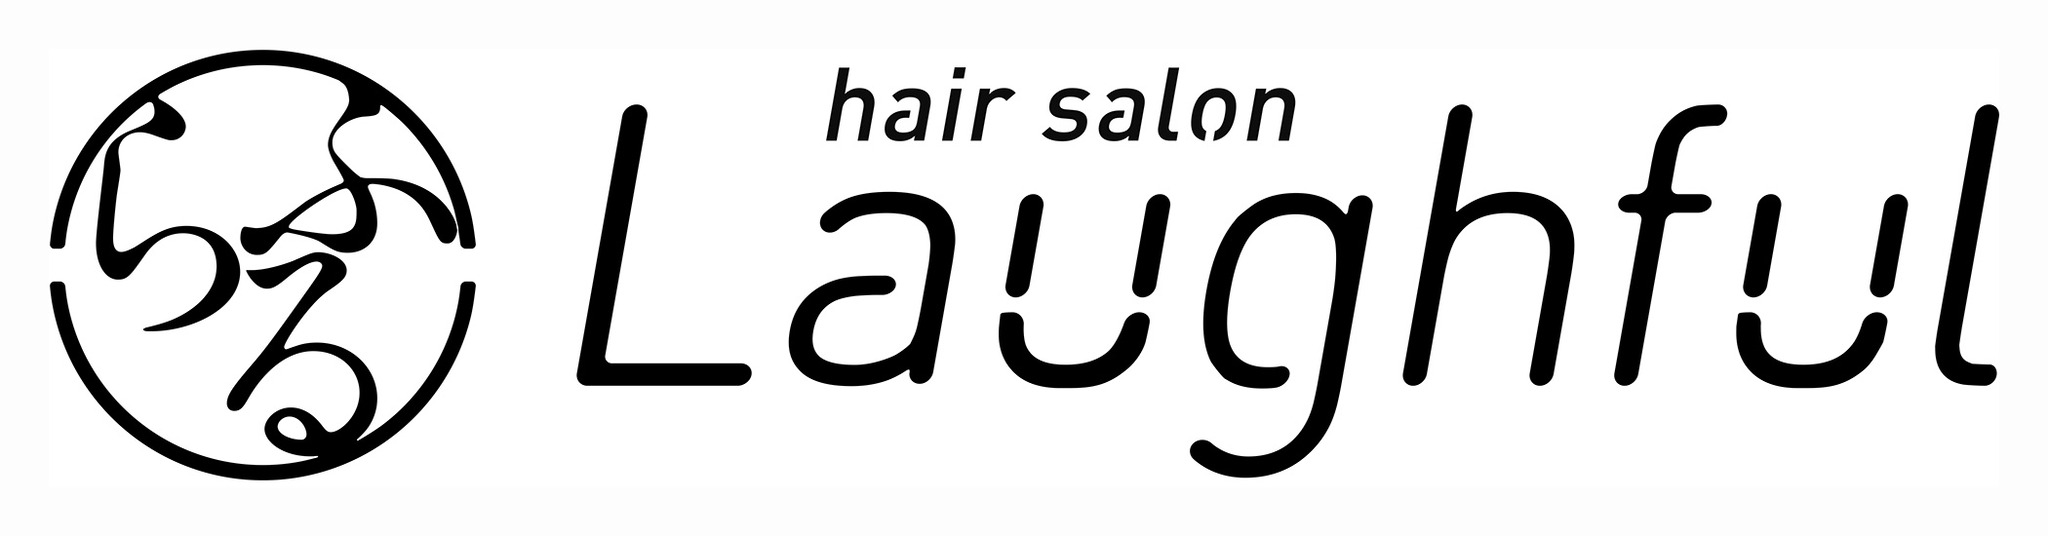 laughful_hair